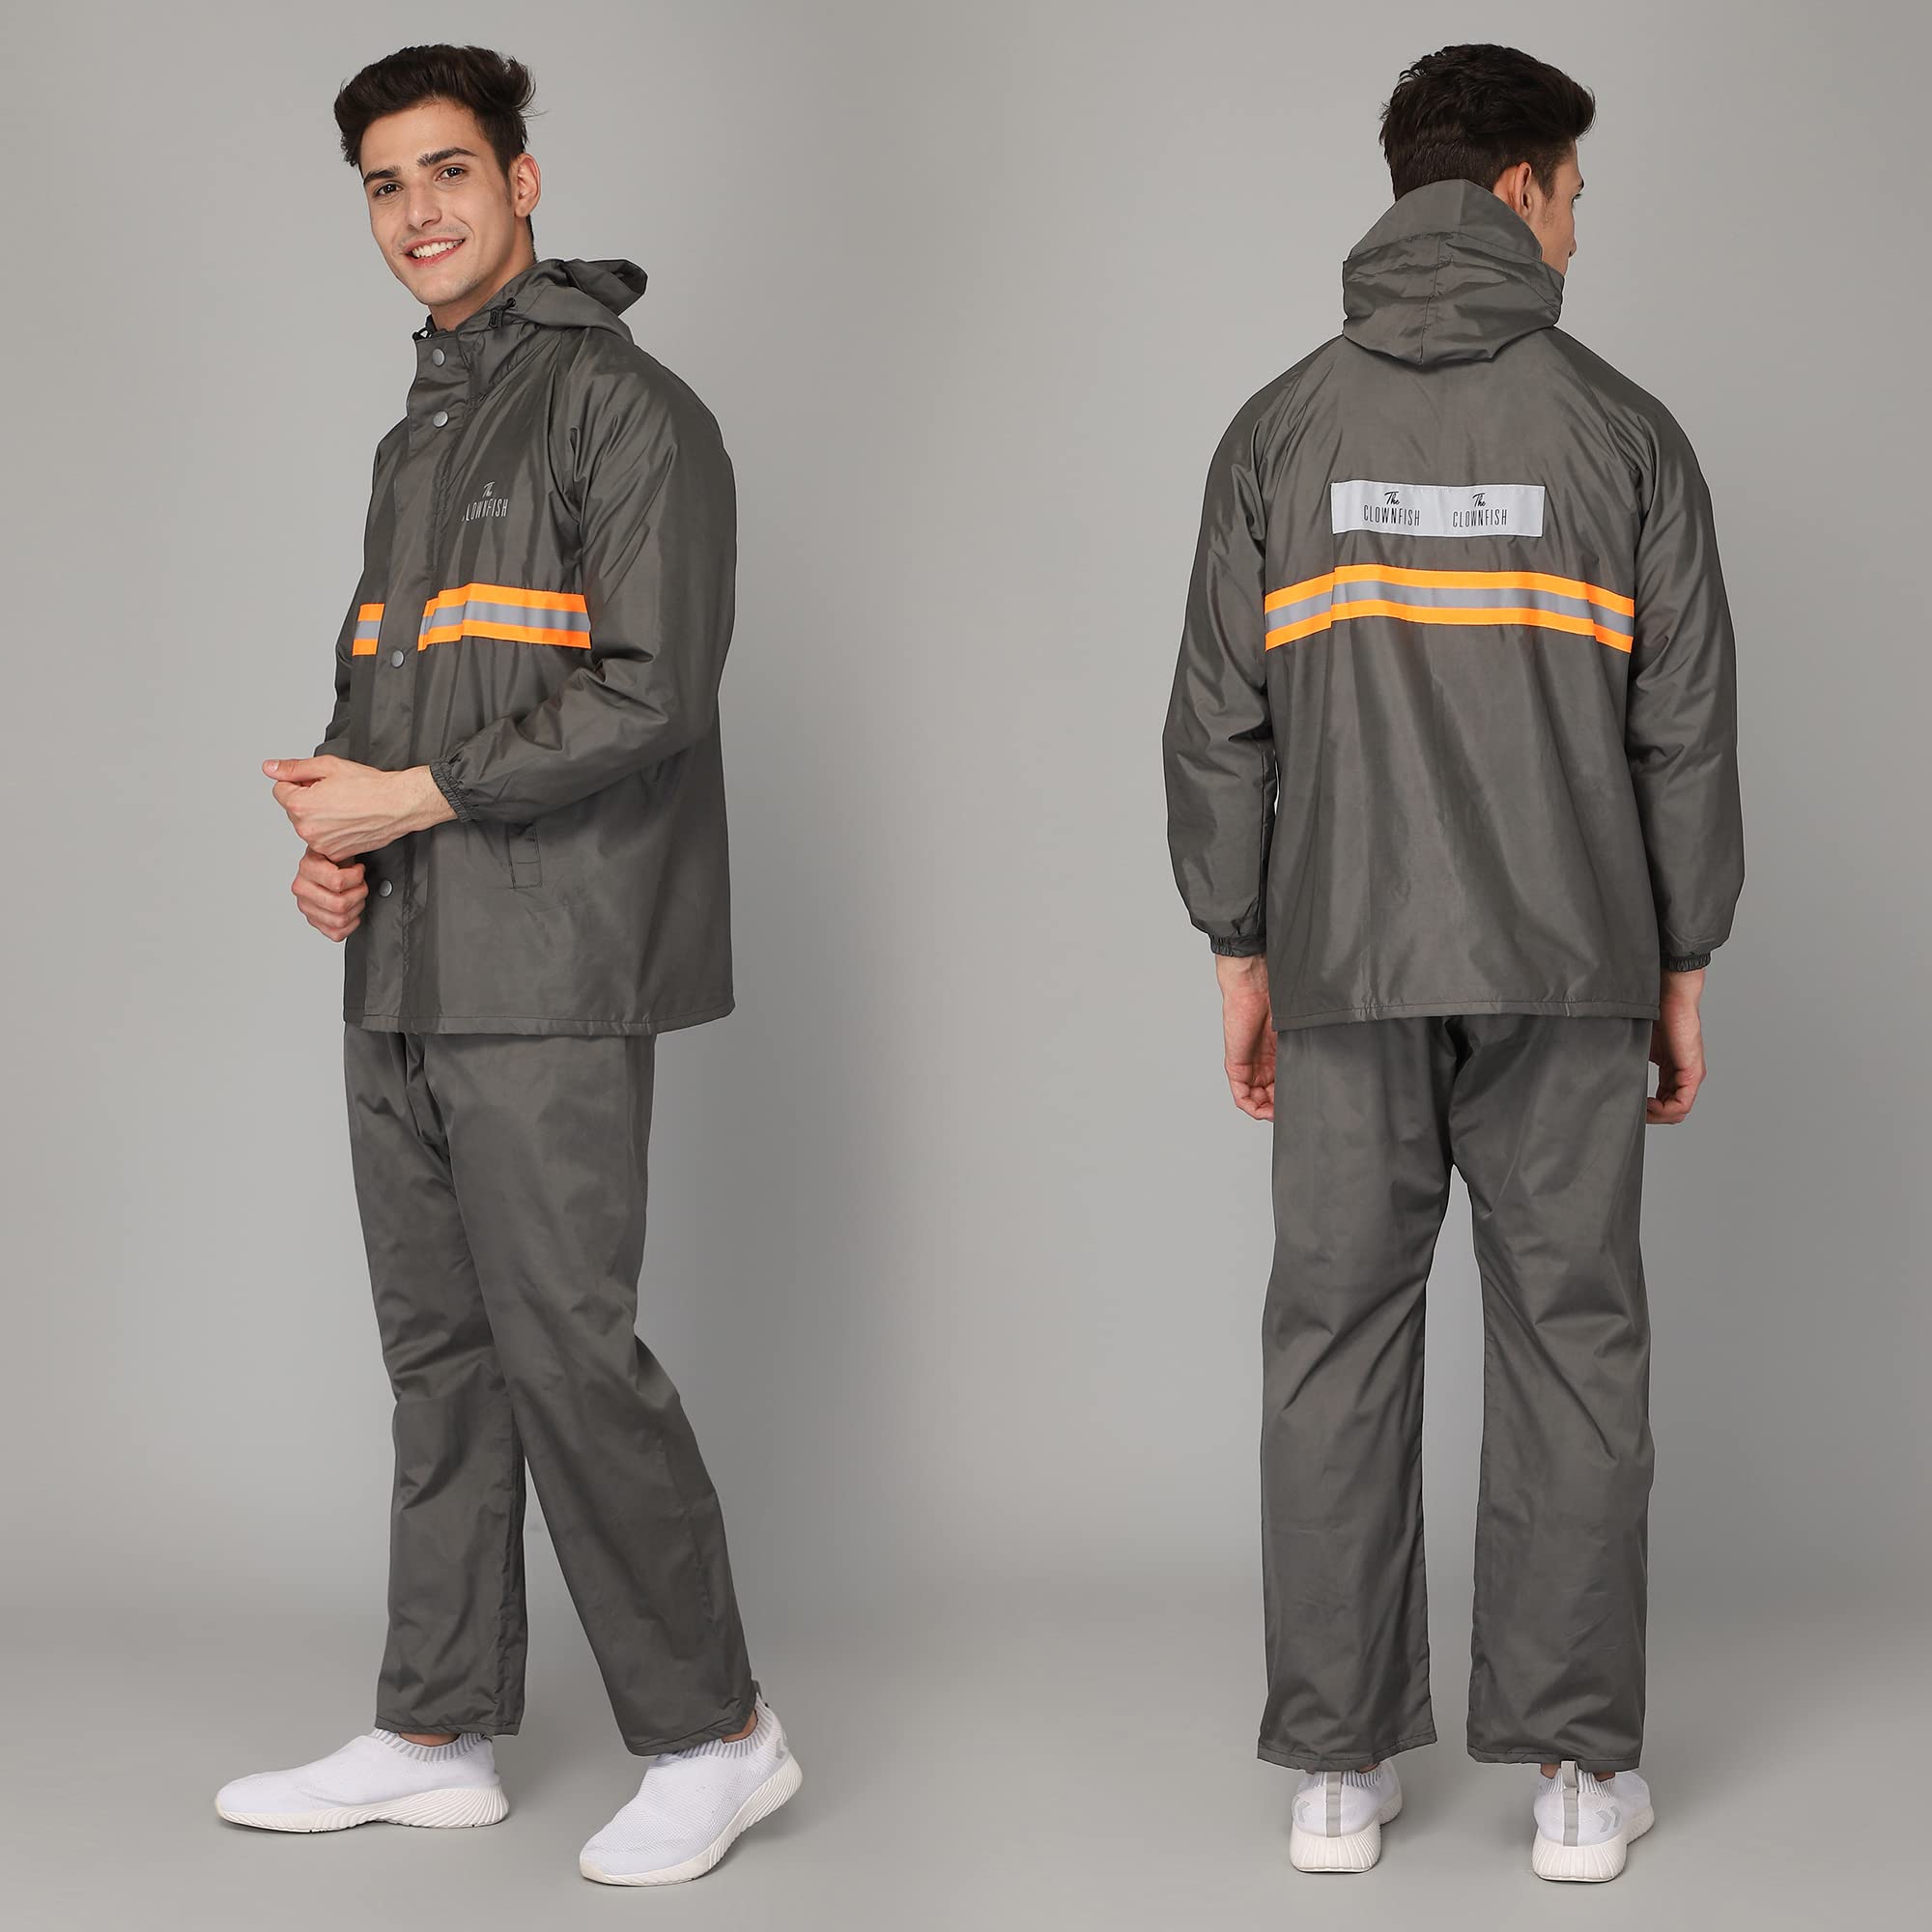 THE CLOWNFISH Philip Series Men's Waterproof Polyester Double Coating Reversible Raincoat with Hood and Reflector Logo at Back. Set of Top and Bottom. Printed Plastic Pouch with Rope (Grey, XX-Large)